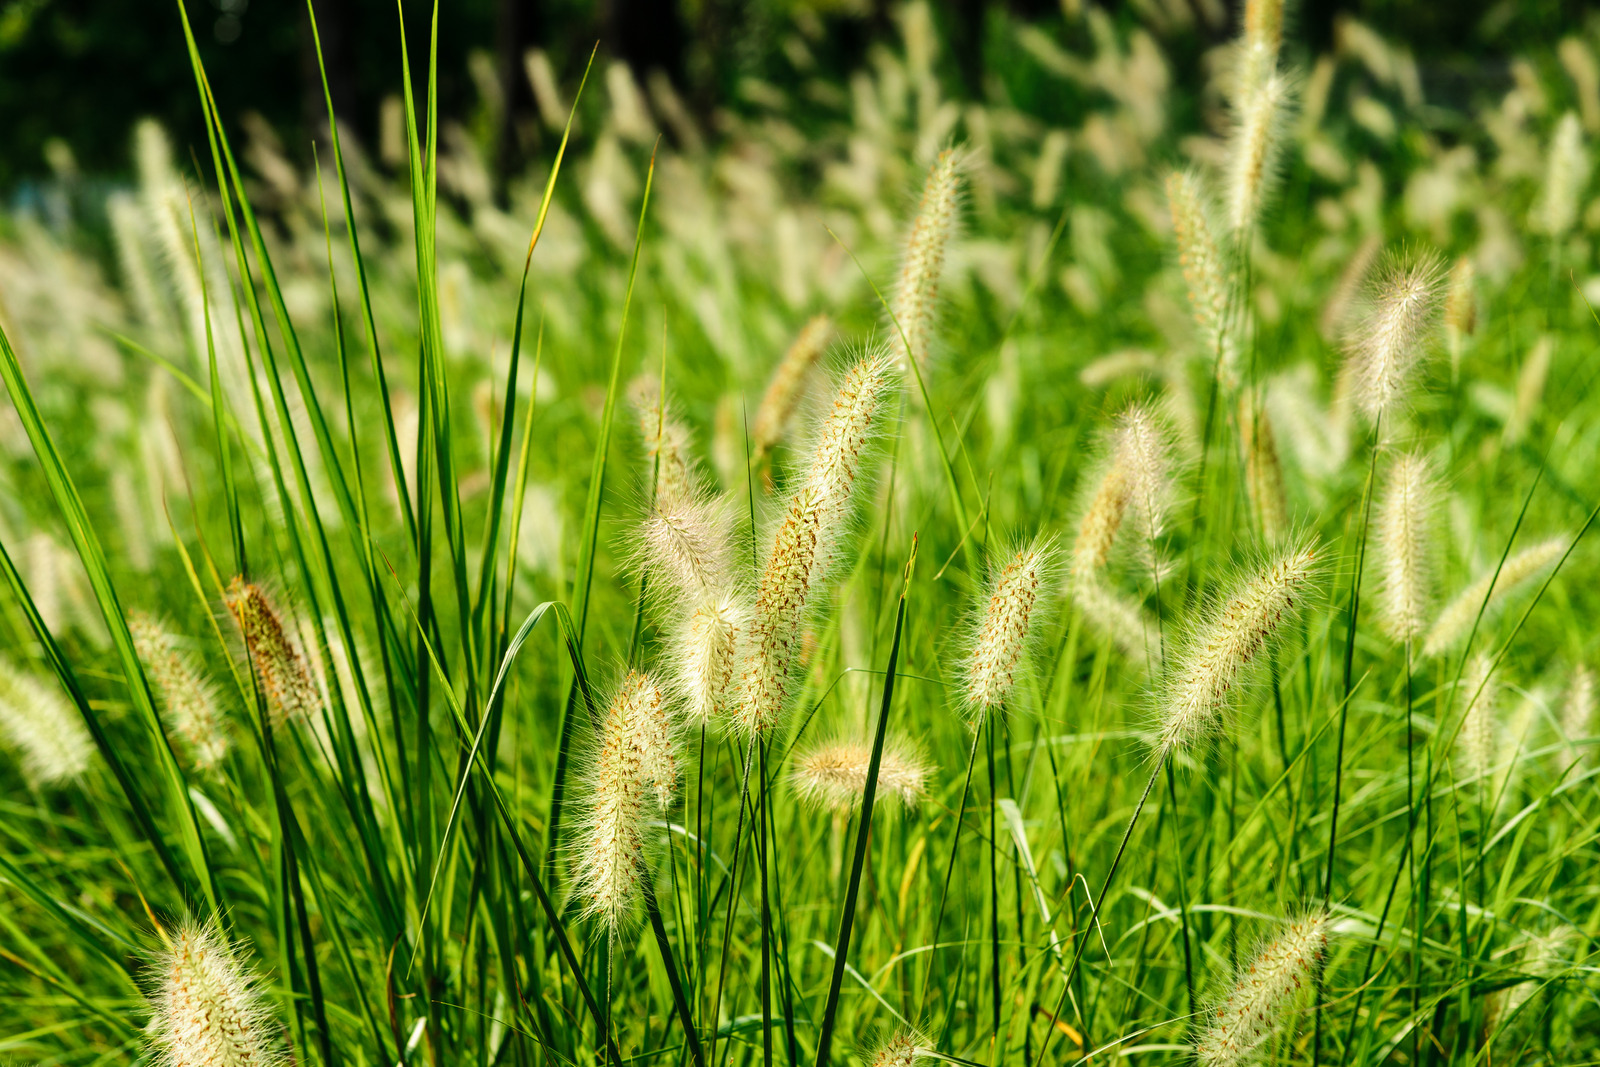 Type of Weed Foxtail